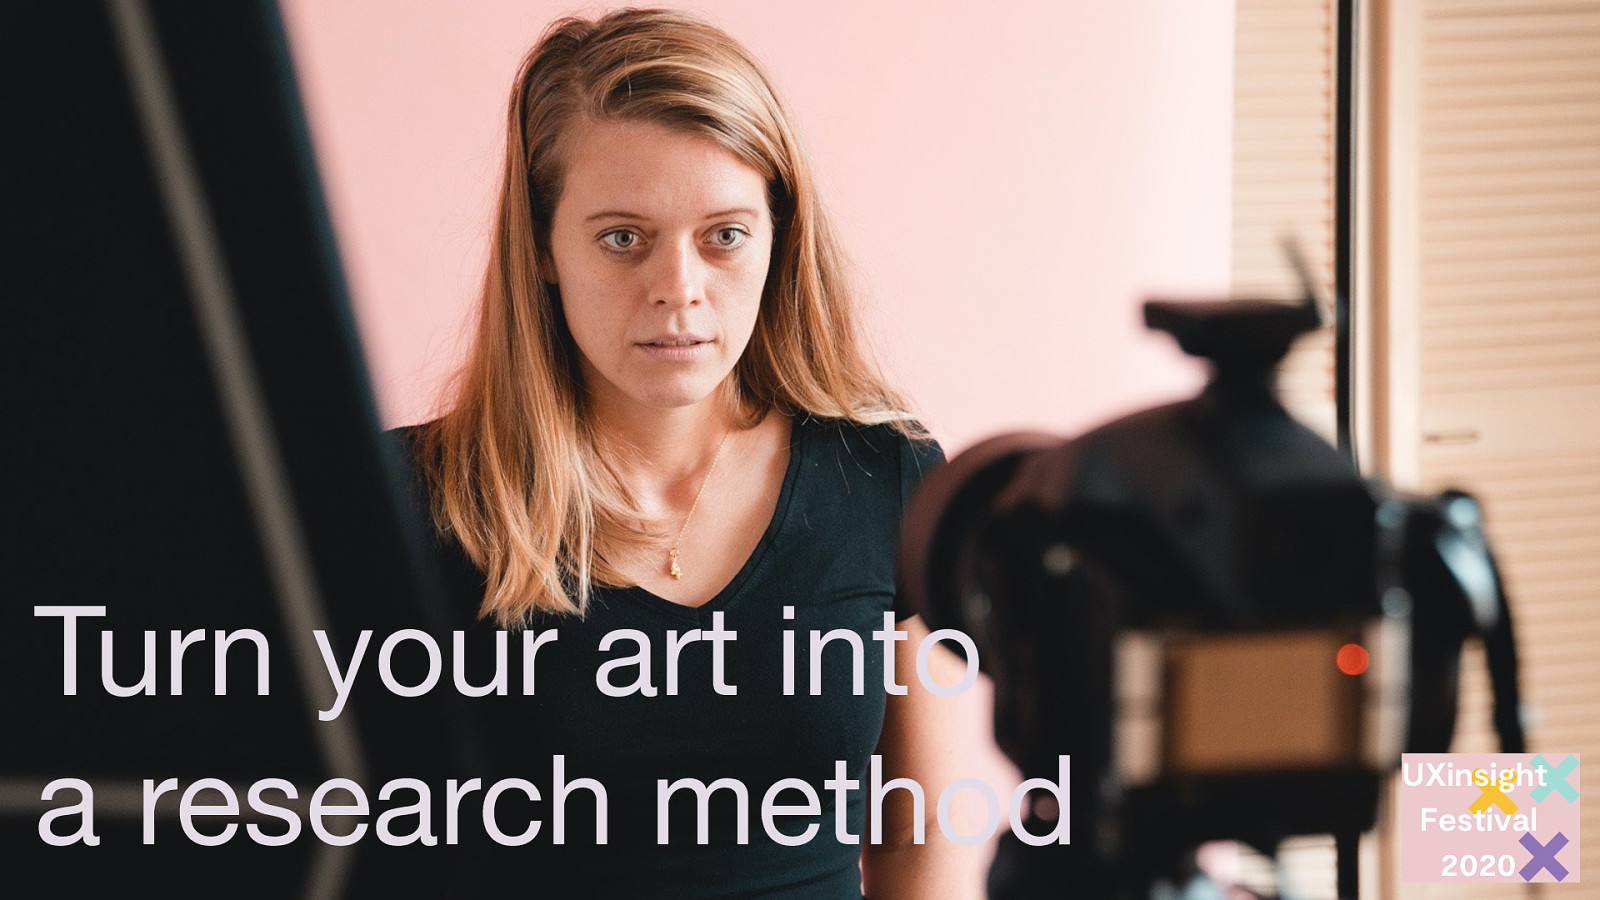 Turn your art into a research method